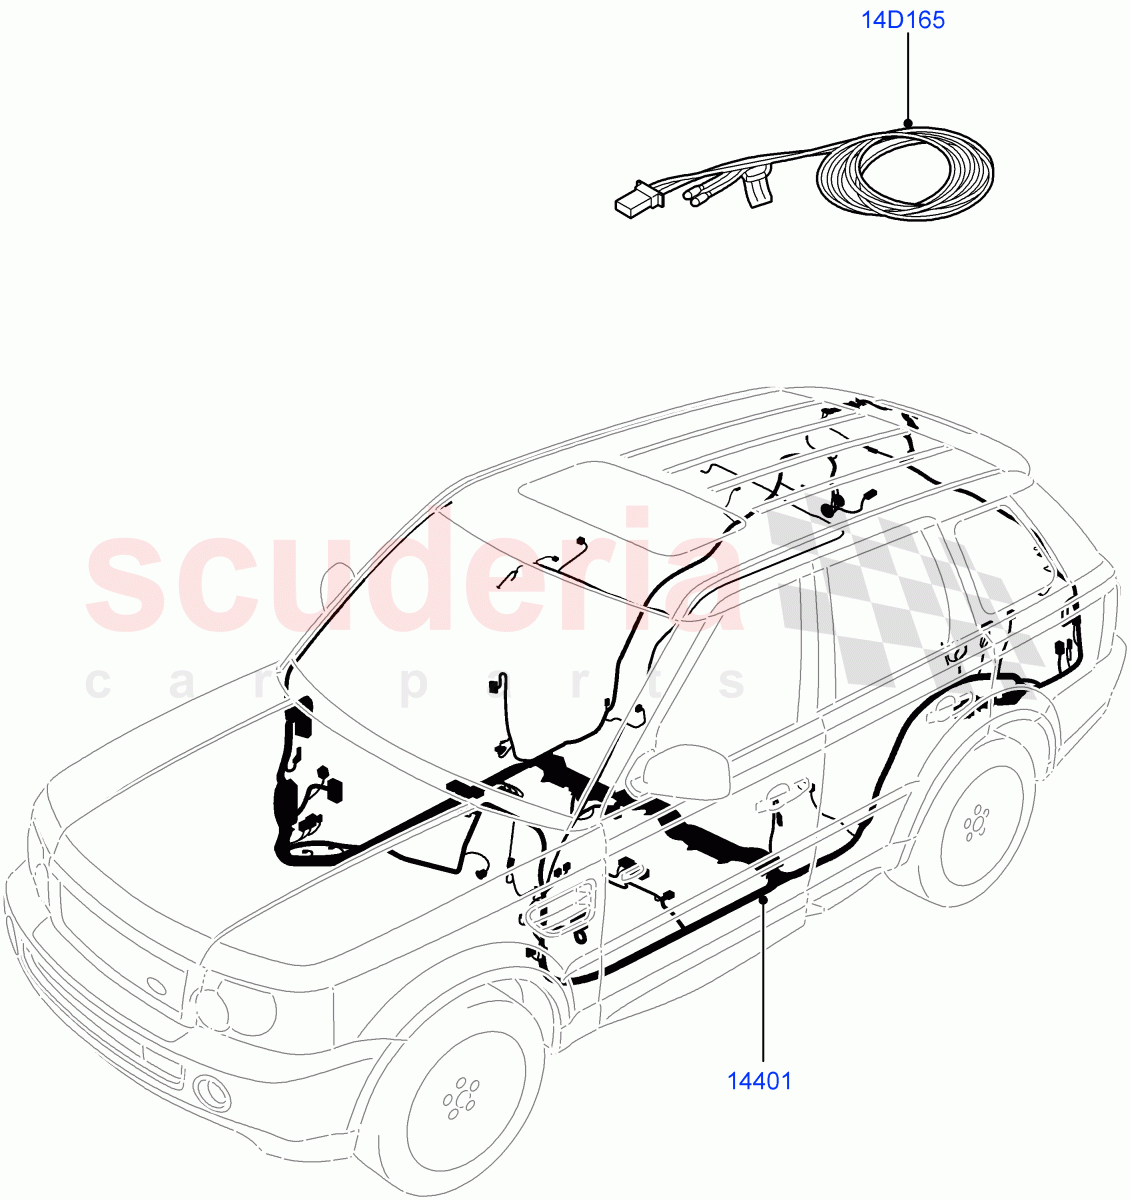 Electrical Wiring - Engine And Dash(Main Harness)((V)FROMBA000001,(V)TOBA999999) of Land Rover Land Rover Range Rover Sport (2010-2013) [5.0 OHC SGDI NA V8 Petrol]